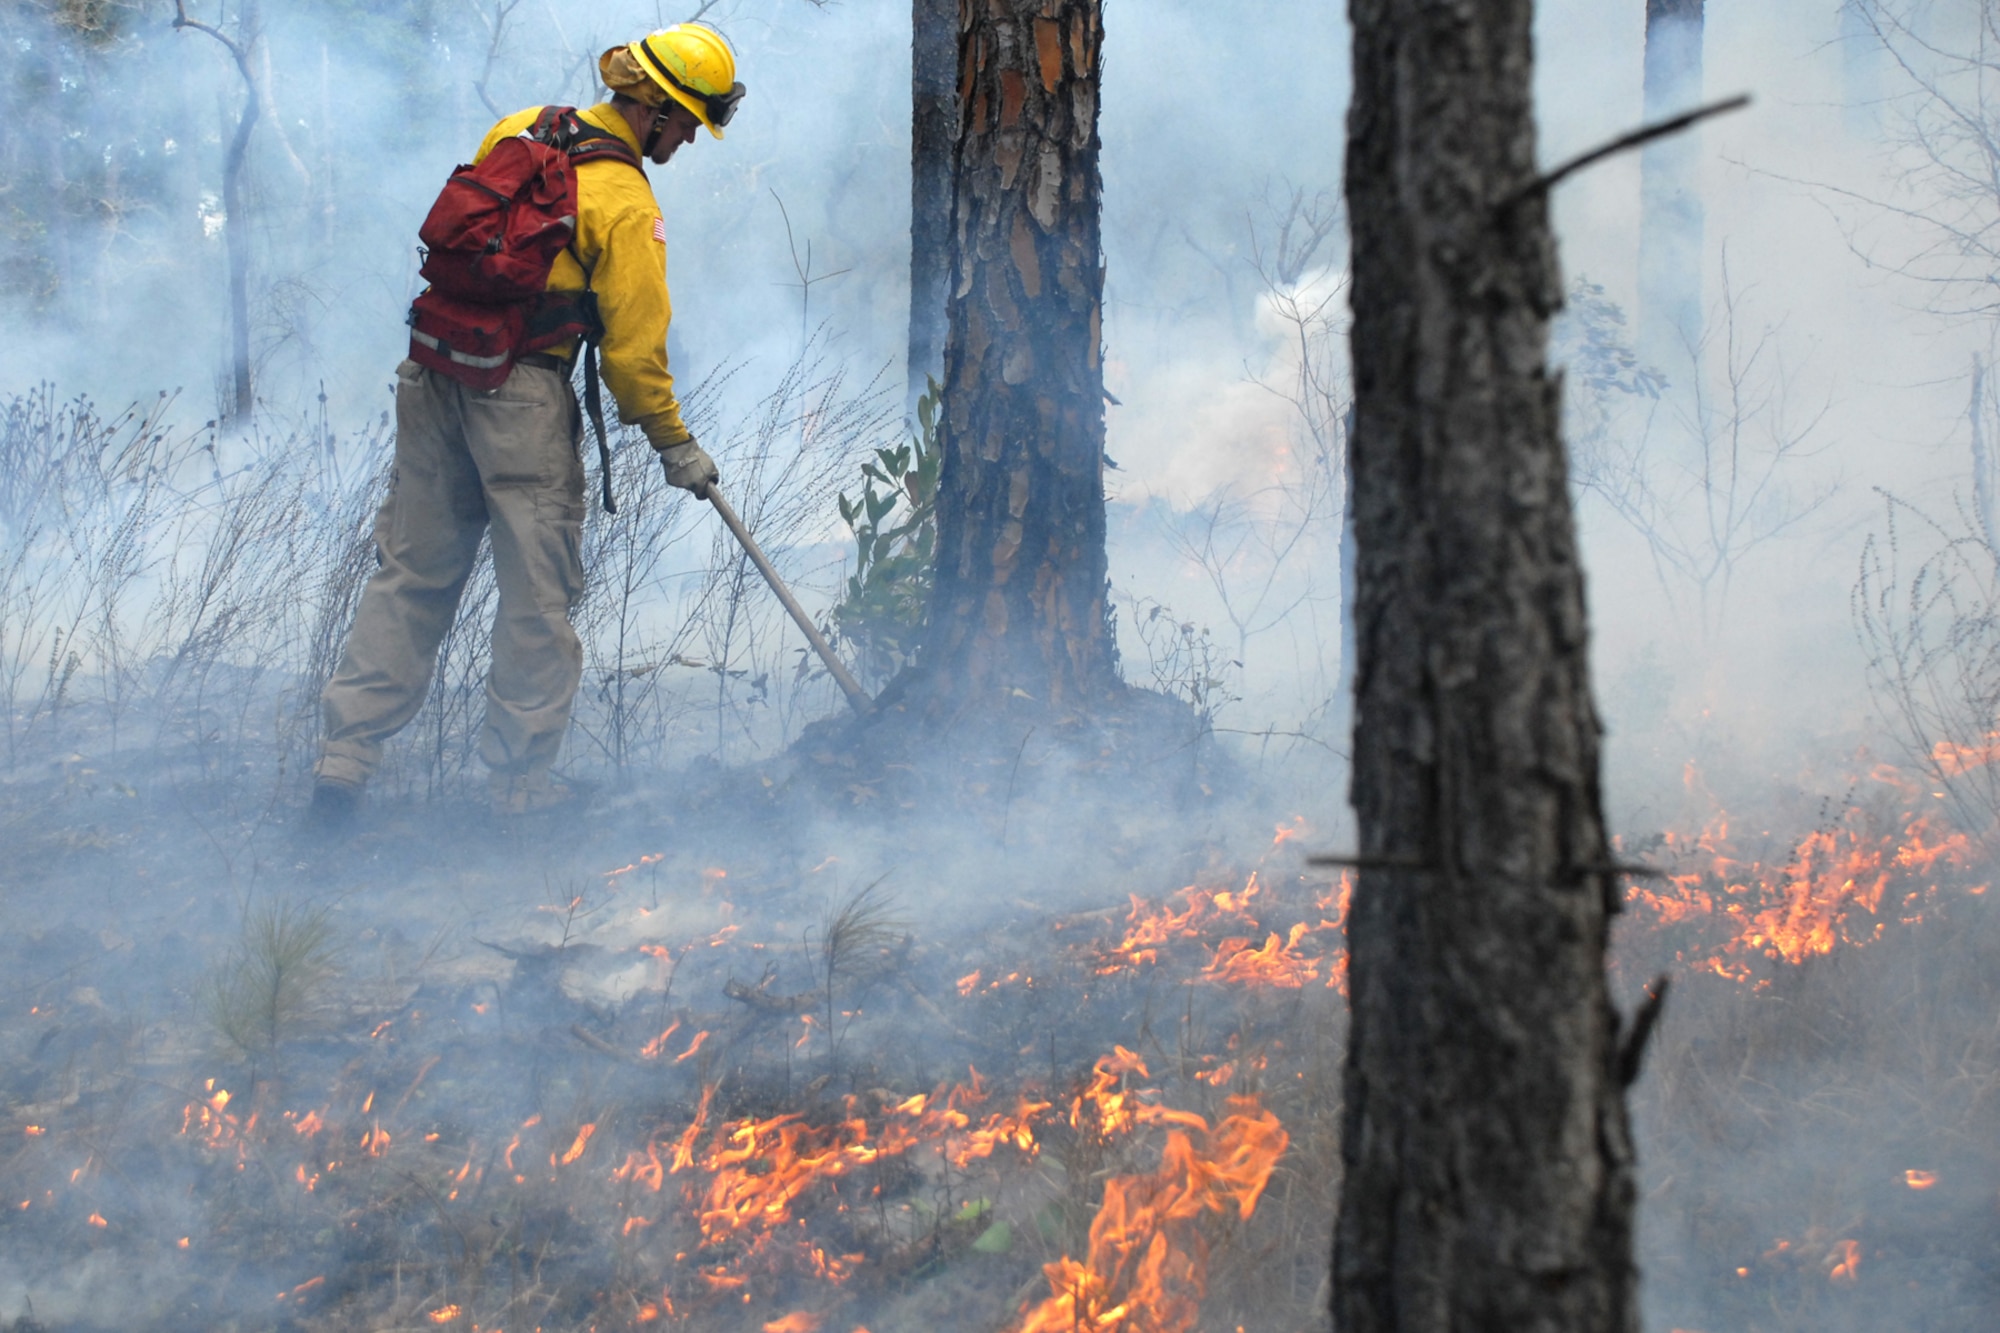 EGLIN AIR FORCE BASE, Fla. -- Ryan Campbell, a Jackson Guard forestry technician and wildland fire specialist, rakes loose debris from around the base of a long-leaf pine tree to prevent damage during a prescribed burn at White Point, an 85-acre recreation area on the Choctawhatchee Bay Jan. 29. Many native plants and animal species depend on Eglin's fire-dependent long-leaf pine ecosystem, 11 of which are federally protected. Endangered species such as the red-cockaded woodpecker, depend on fire that is typically caused by either lightning strikes or Eglin's resident fire managers to survive. As of the 2008 control burn season, Jackson Guard's five-year average is 73,000 acres burned annually. (U.S. Air Force Photo by Staff Sgt. Mike Meares)